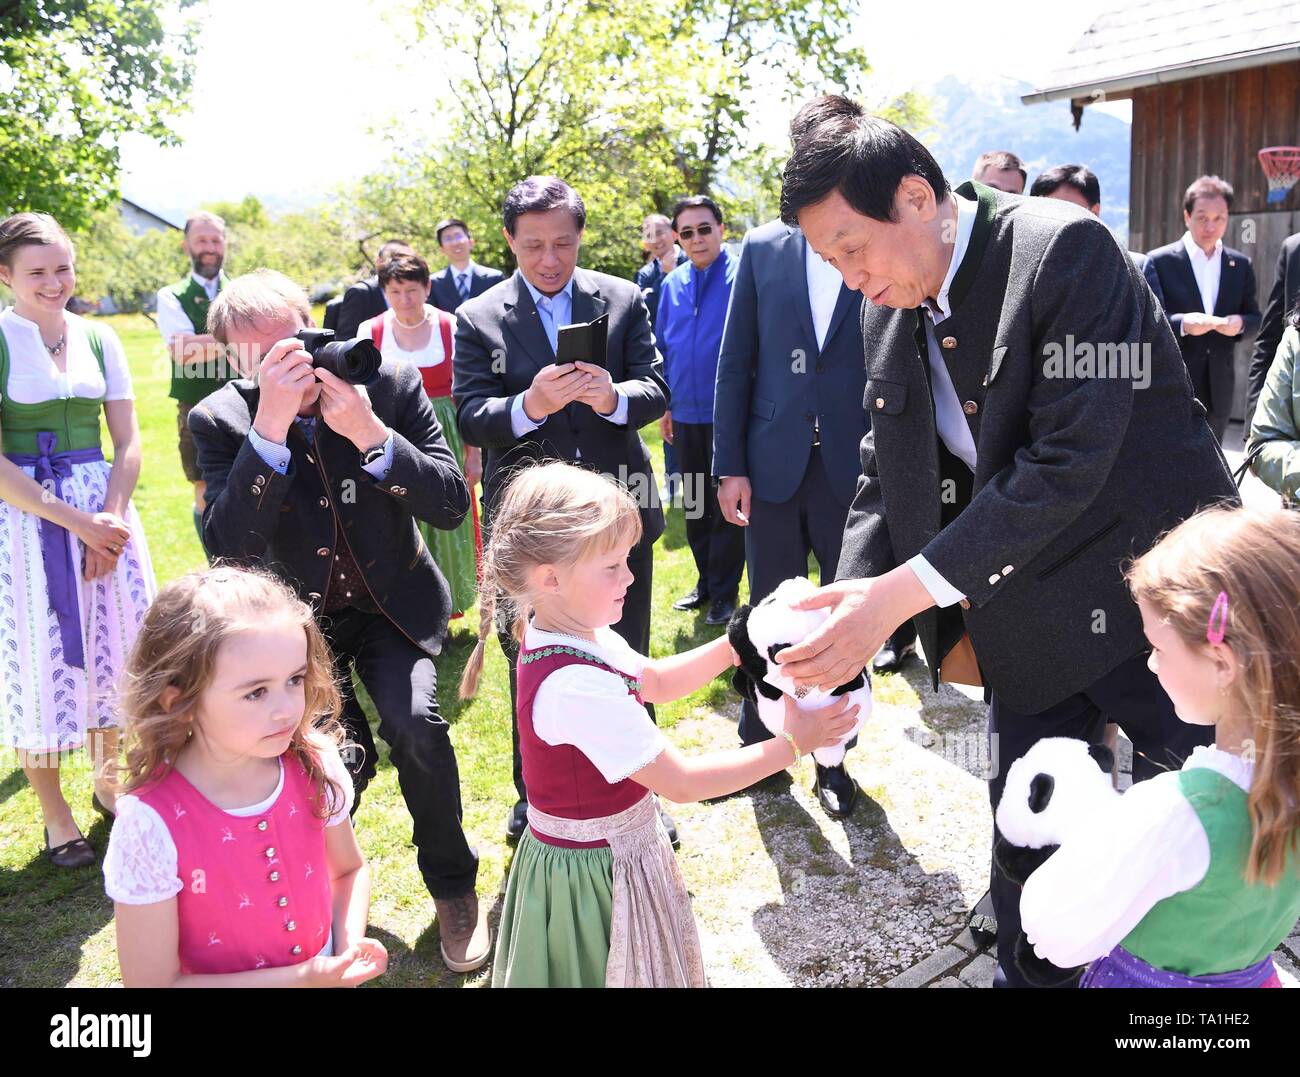 Vienna, Austria. 19th May, 2019. Li Zhanshu, chairman of the Standing Committee of the National People's Congress (NPC), visits a farm in Salzburg, Austria, on May 19, 2019. China's top legislator Li Zhanshu paid an official friendly visit from May 18 to 21 to Austria, where he met with Austrian leaders on promoting bilateral ties and expressed China's stance on upholding multilateralism and free trade. Credit: Shen Hong/Xinhua/Alamy Live News Stock Photo